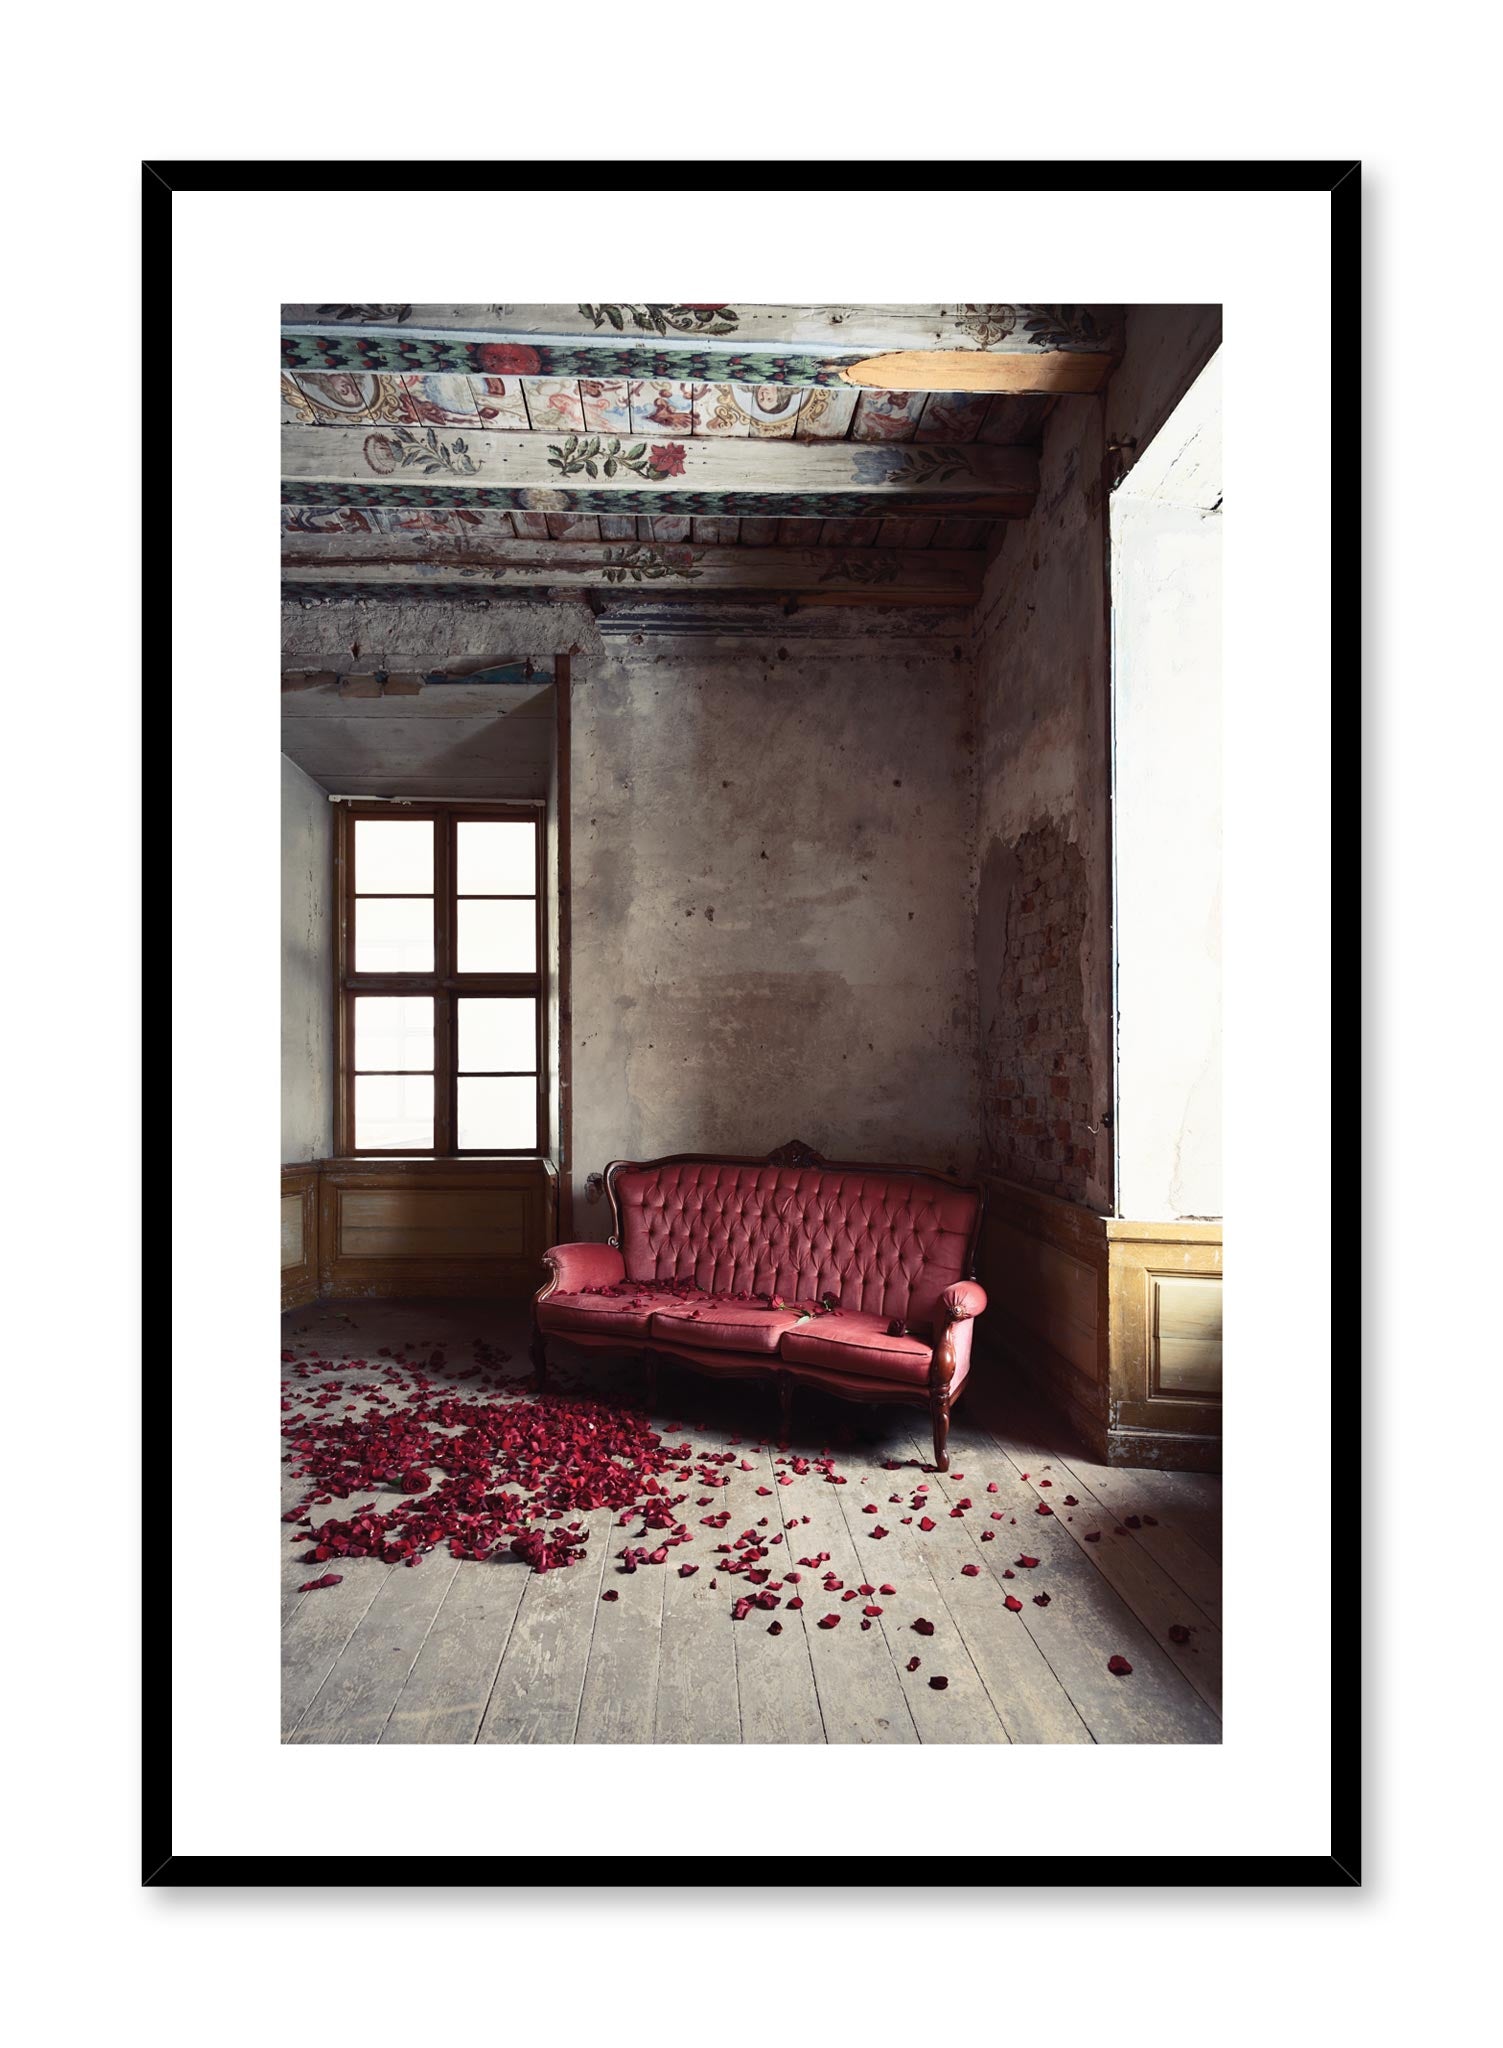 Minimalist design photography poster of Antique Room with flowers by Love Warriors Creative Studio - Buy at Opposite Wall